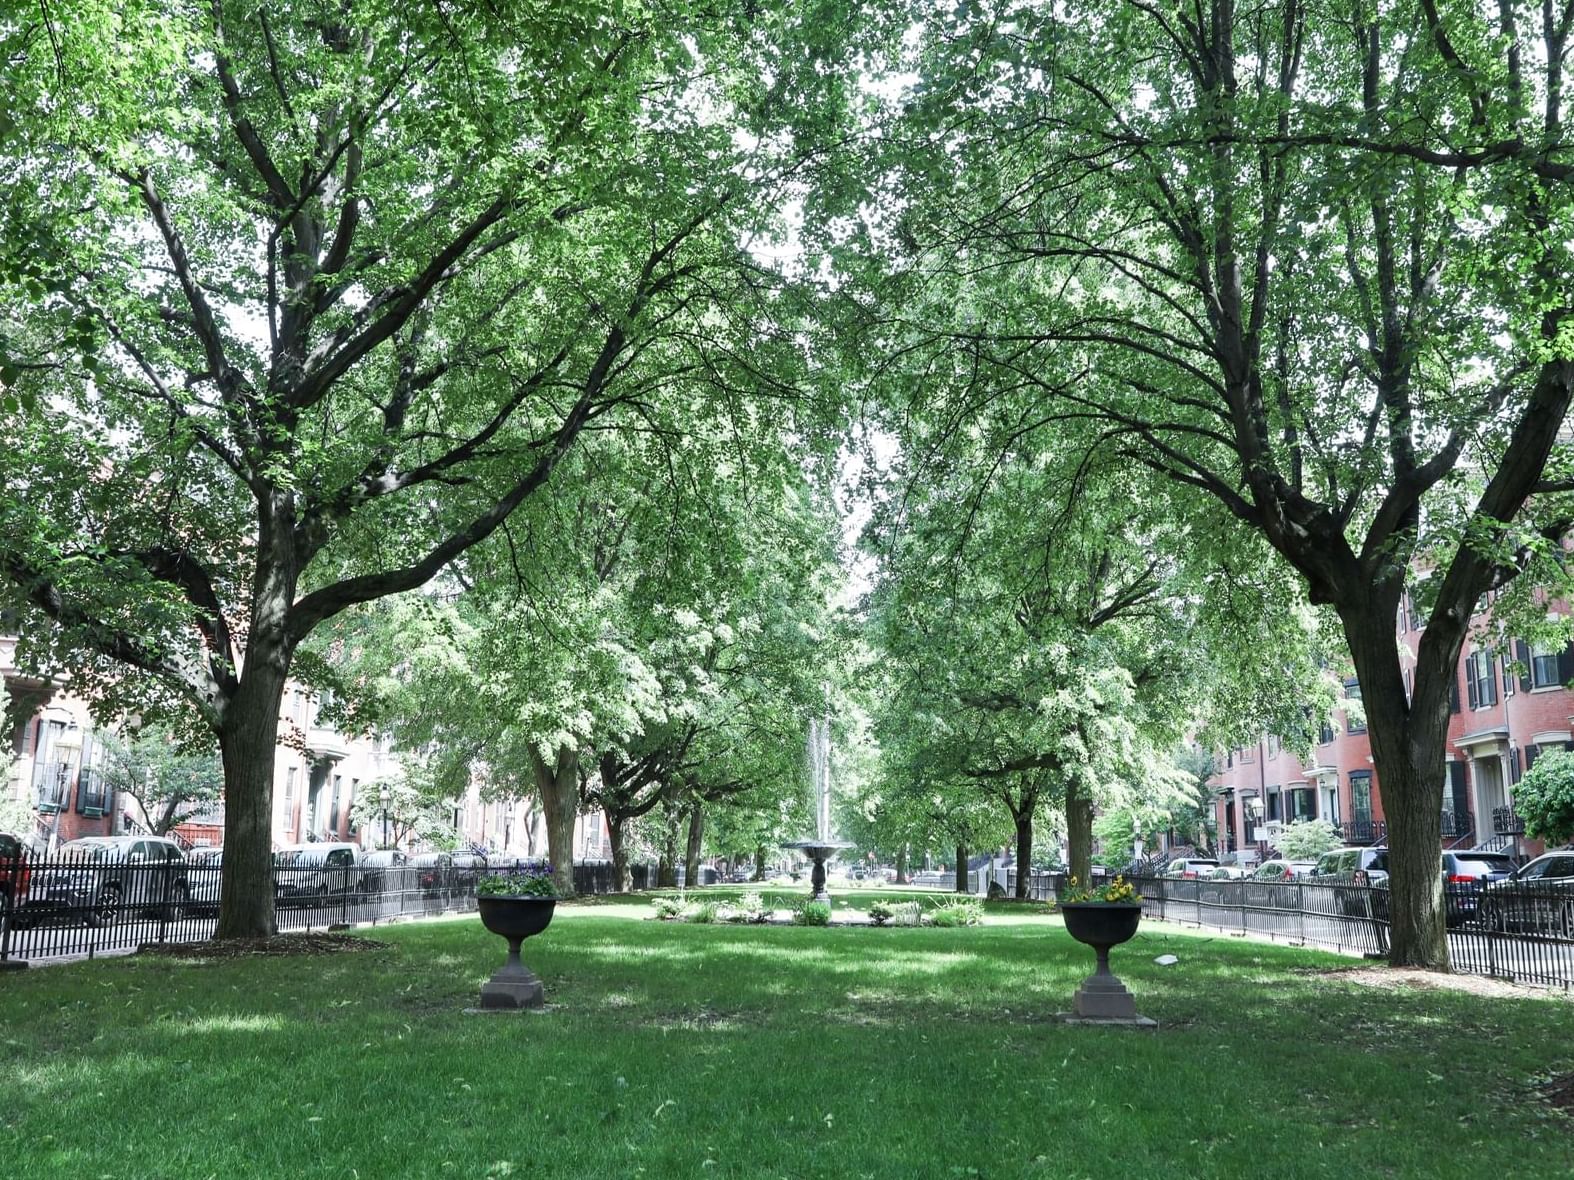 A green park between two rows of brownstones.